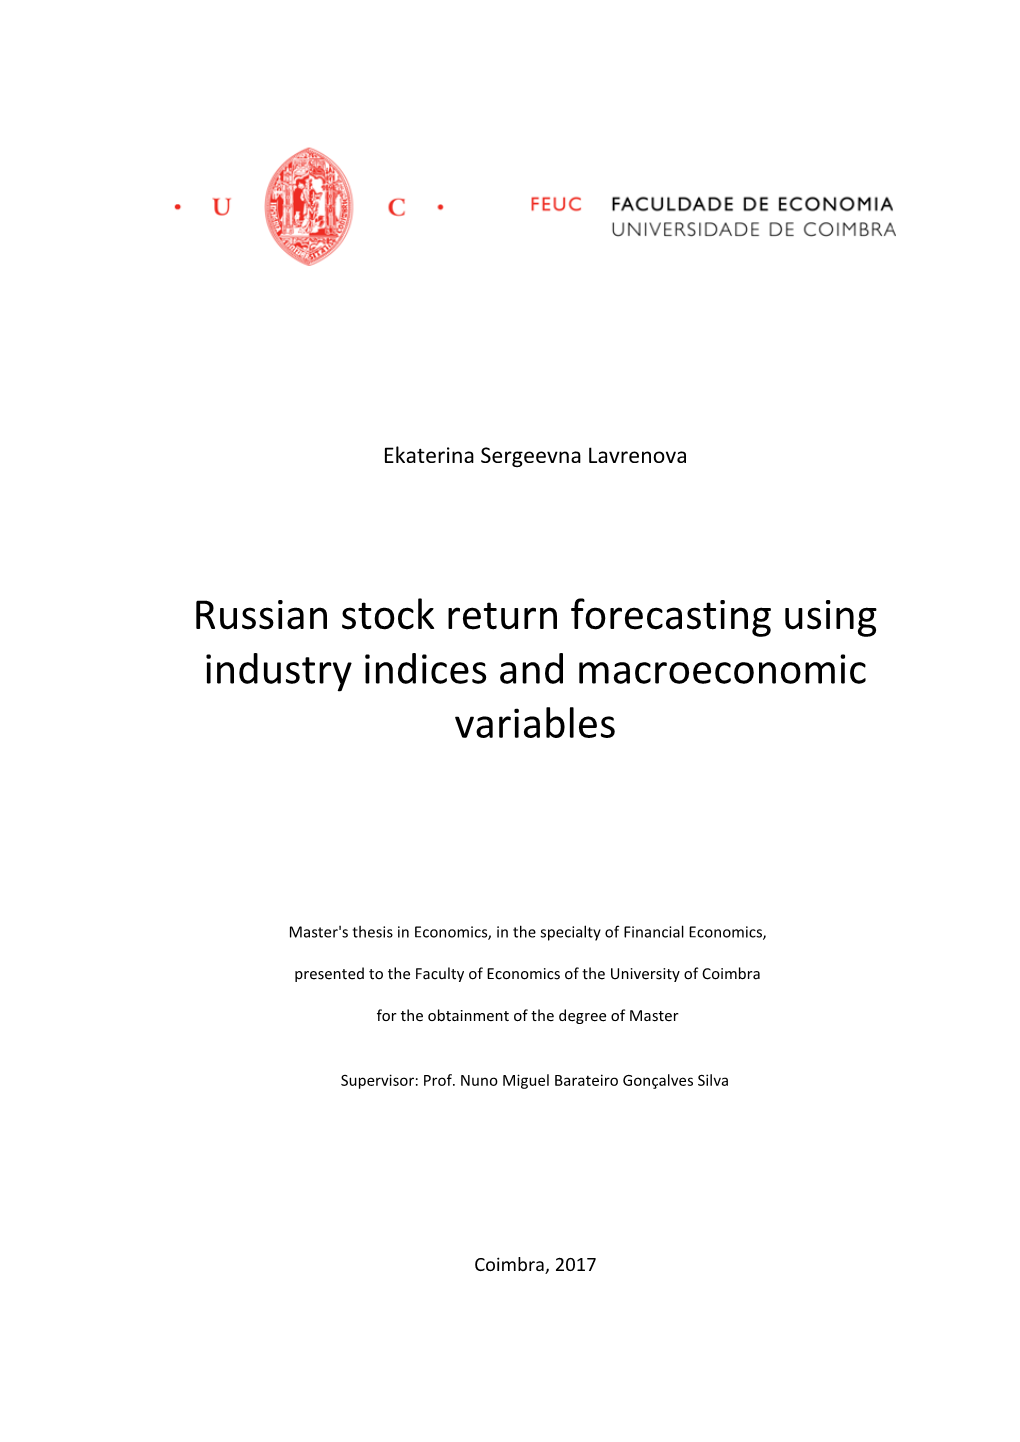 Russian Stock Return Forecasting Using Industry Indices and Macroeconomic Variables